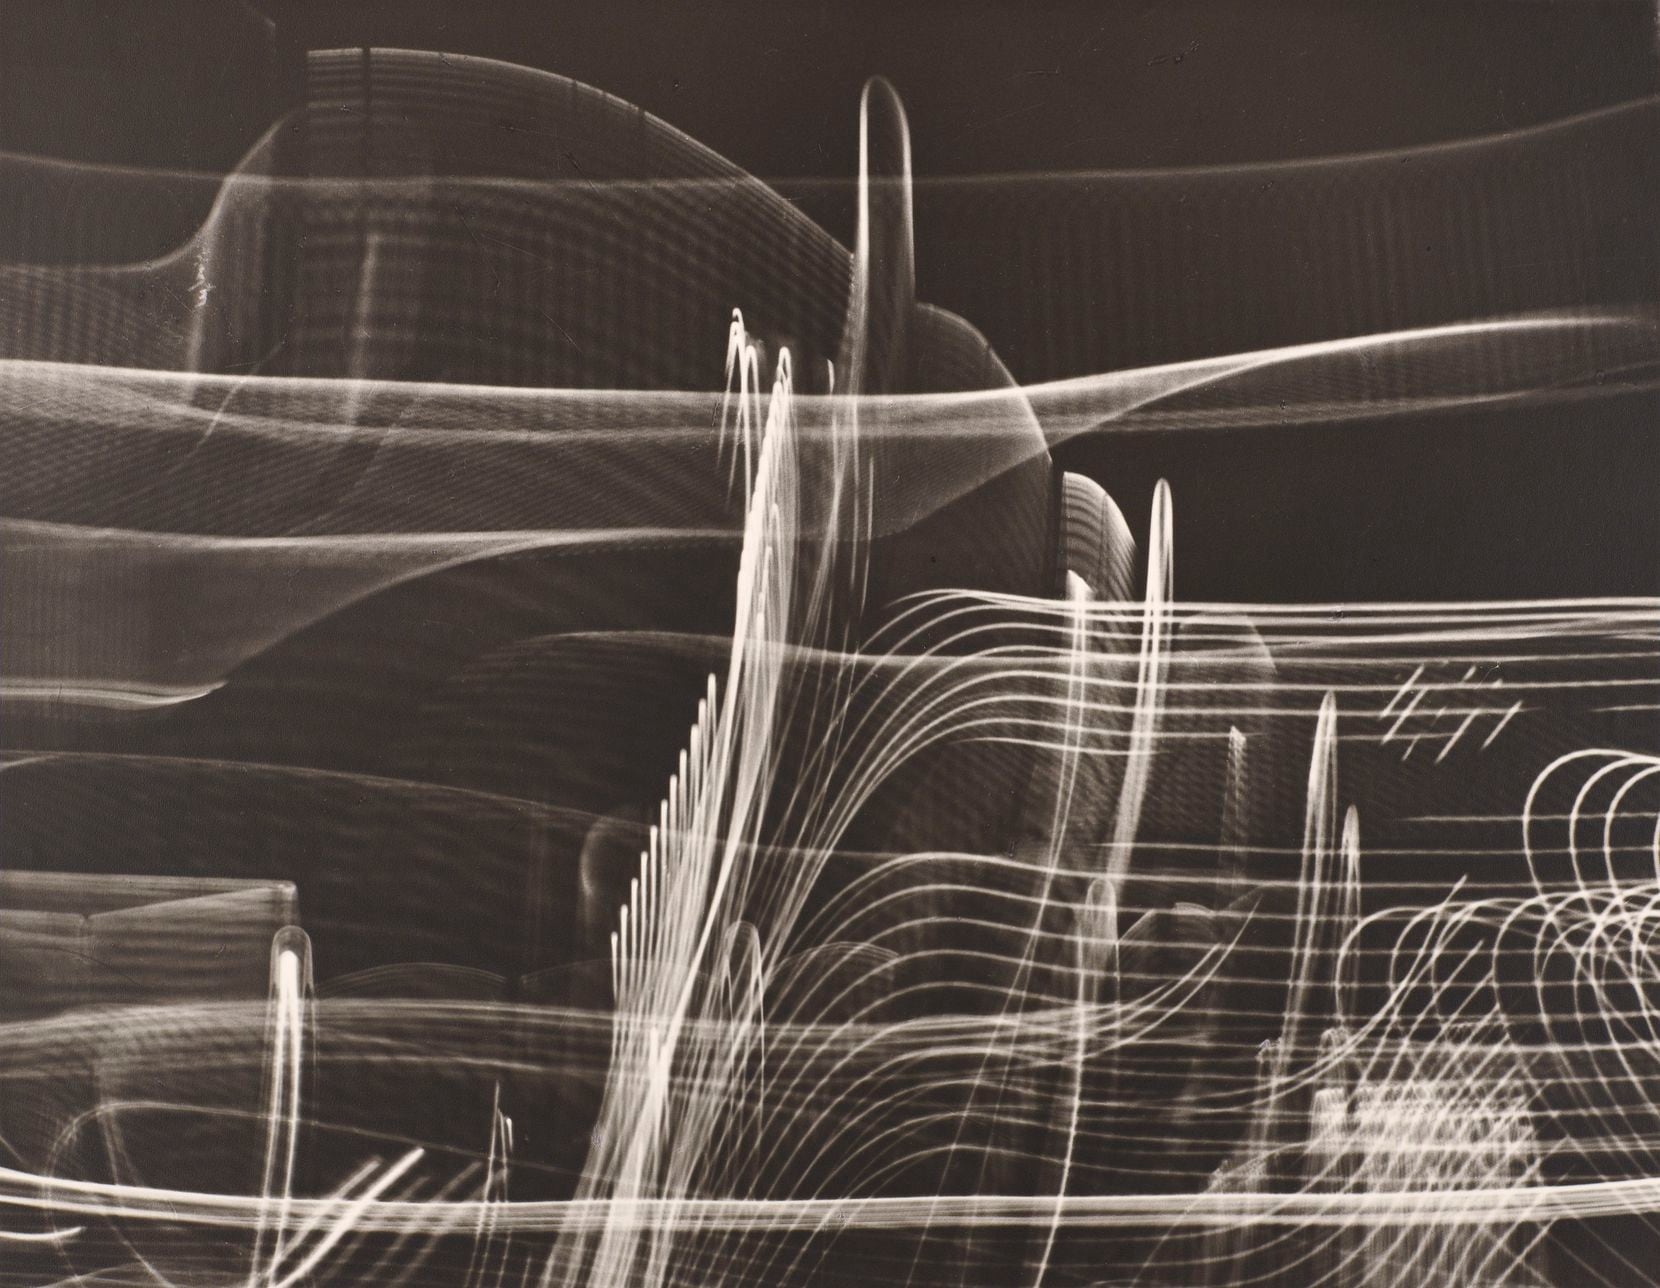 Carlotta Corpron was associated with the Bauhaus movement and played a significant role in establishing photography in North Texas. The exhibition features her image “A Walk in Fair Park, Dallas,” one of her highly experimental “light drawings,” black-and-white abstractions she made by moving her camera around while the shutter was open. 